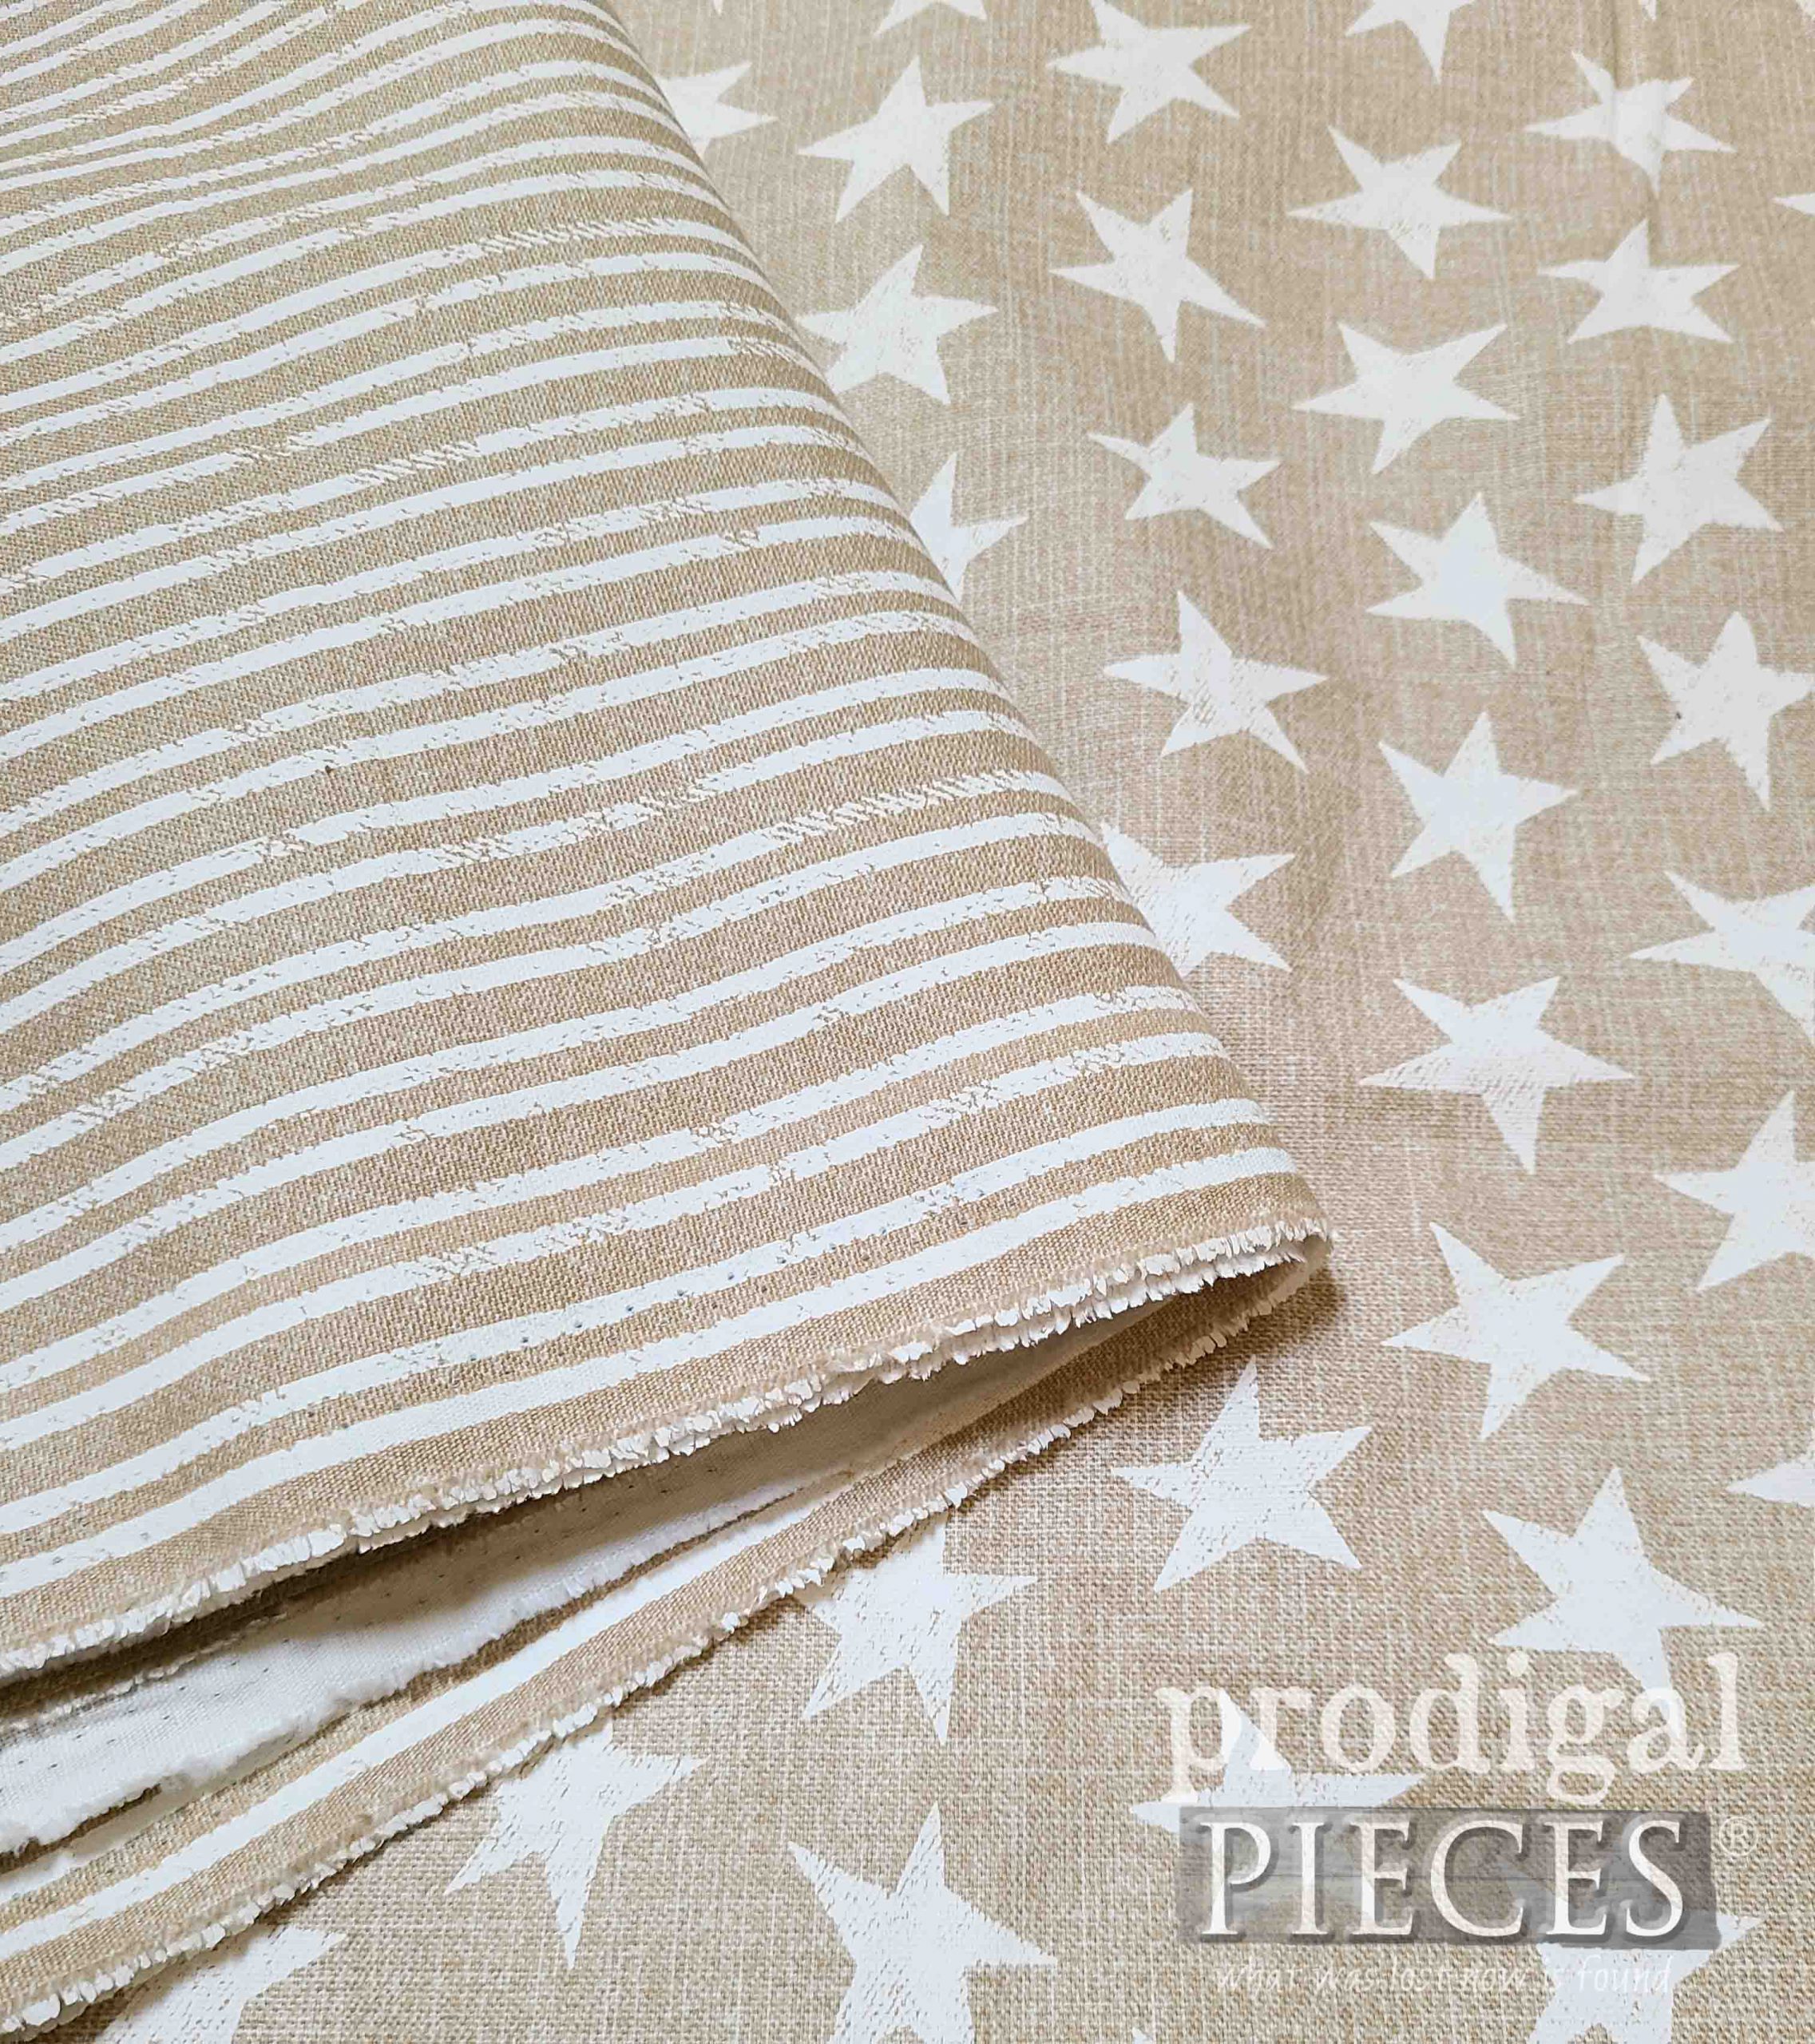 Moda Fabric for Child's Upholstered Rocking Chair | prodigalpieces.com